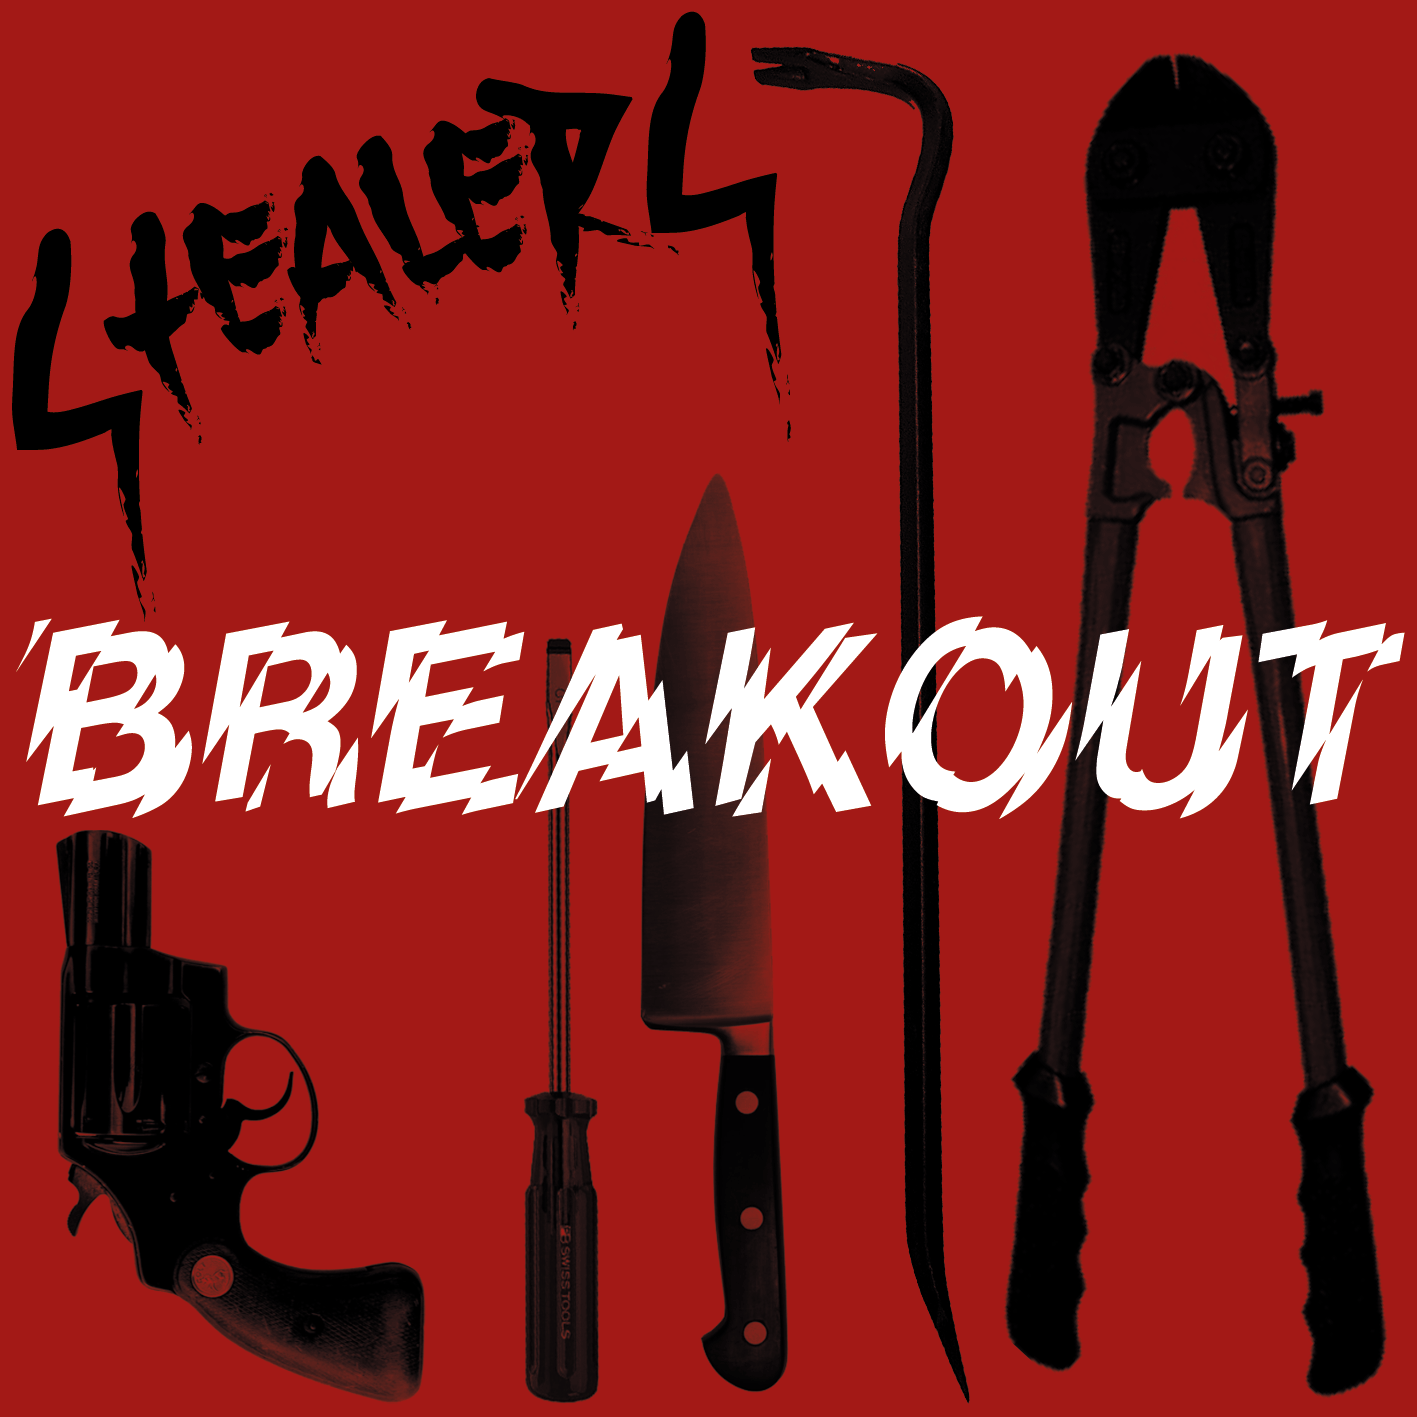 Stealers - Breakout 7" (red/white swirl)